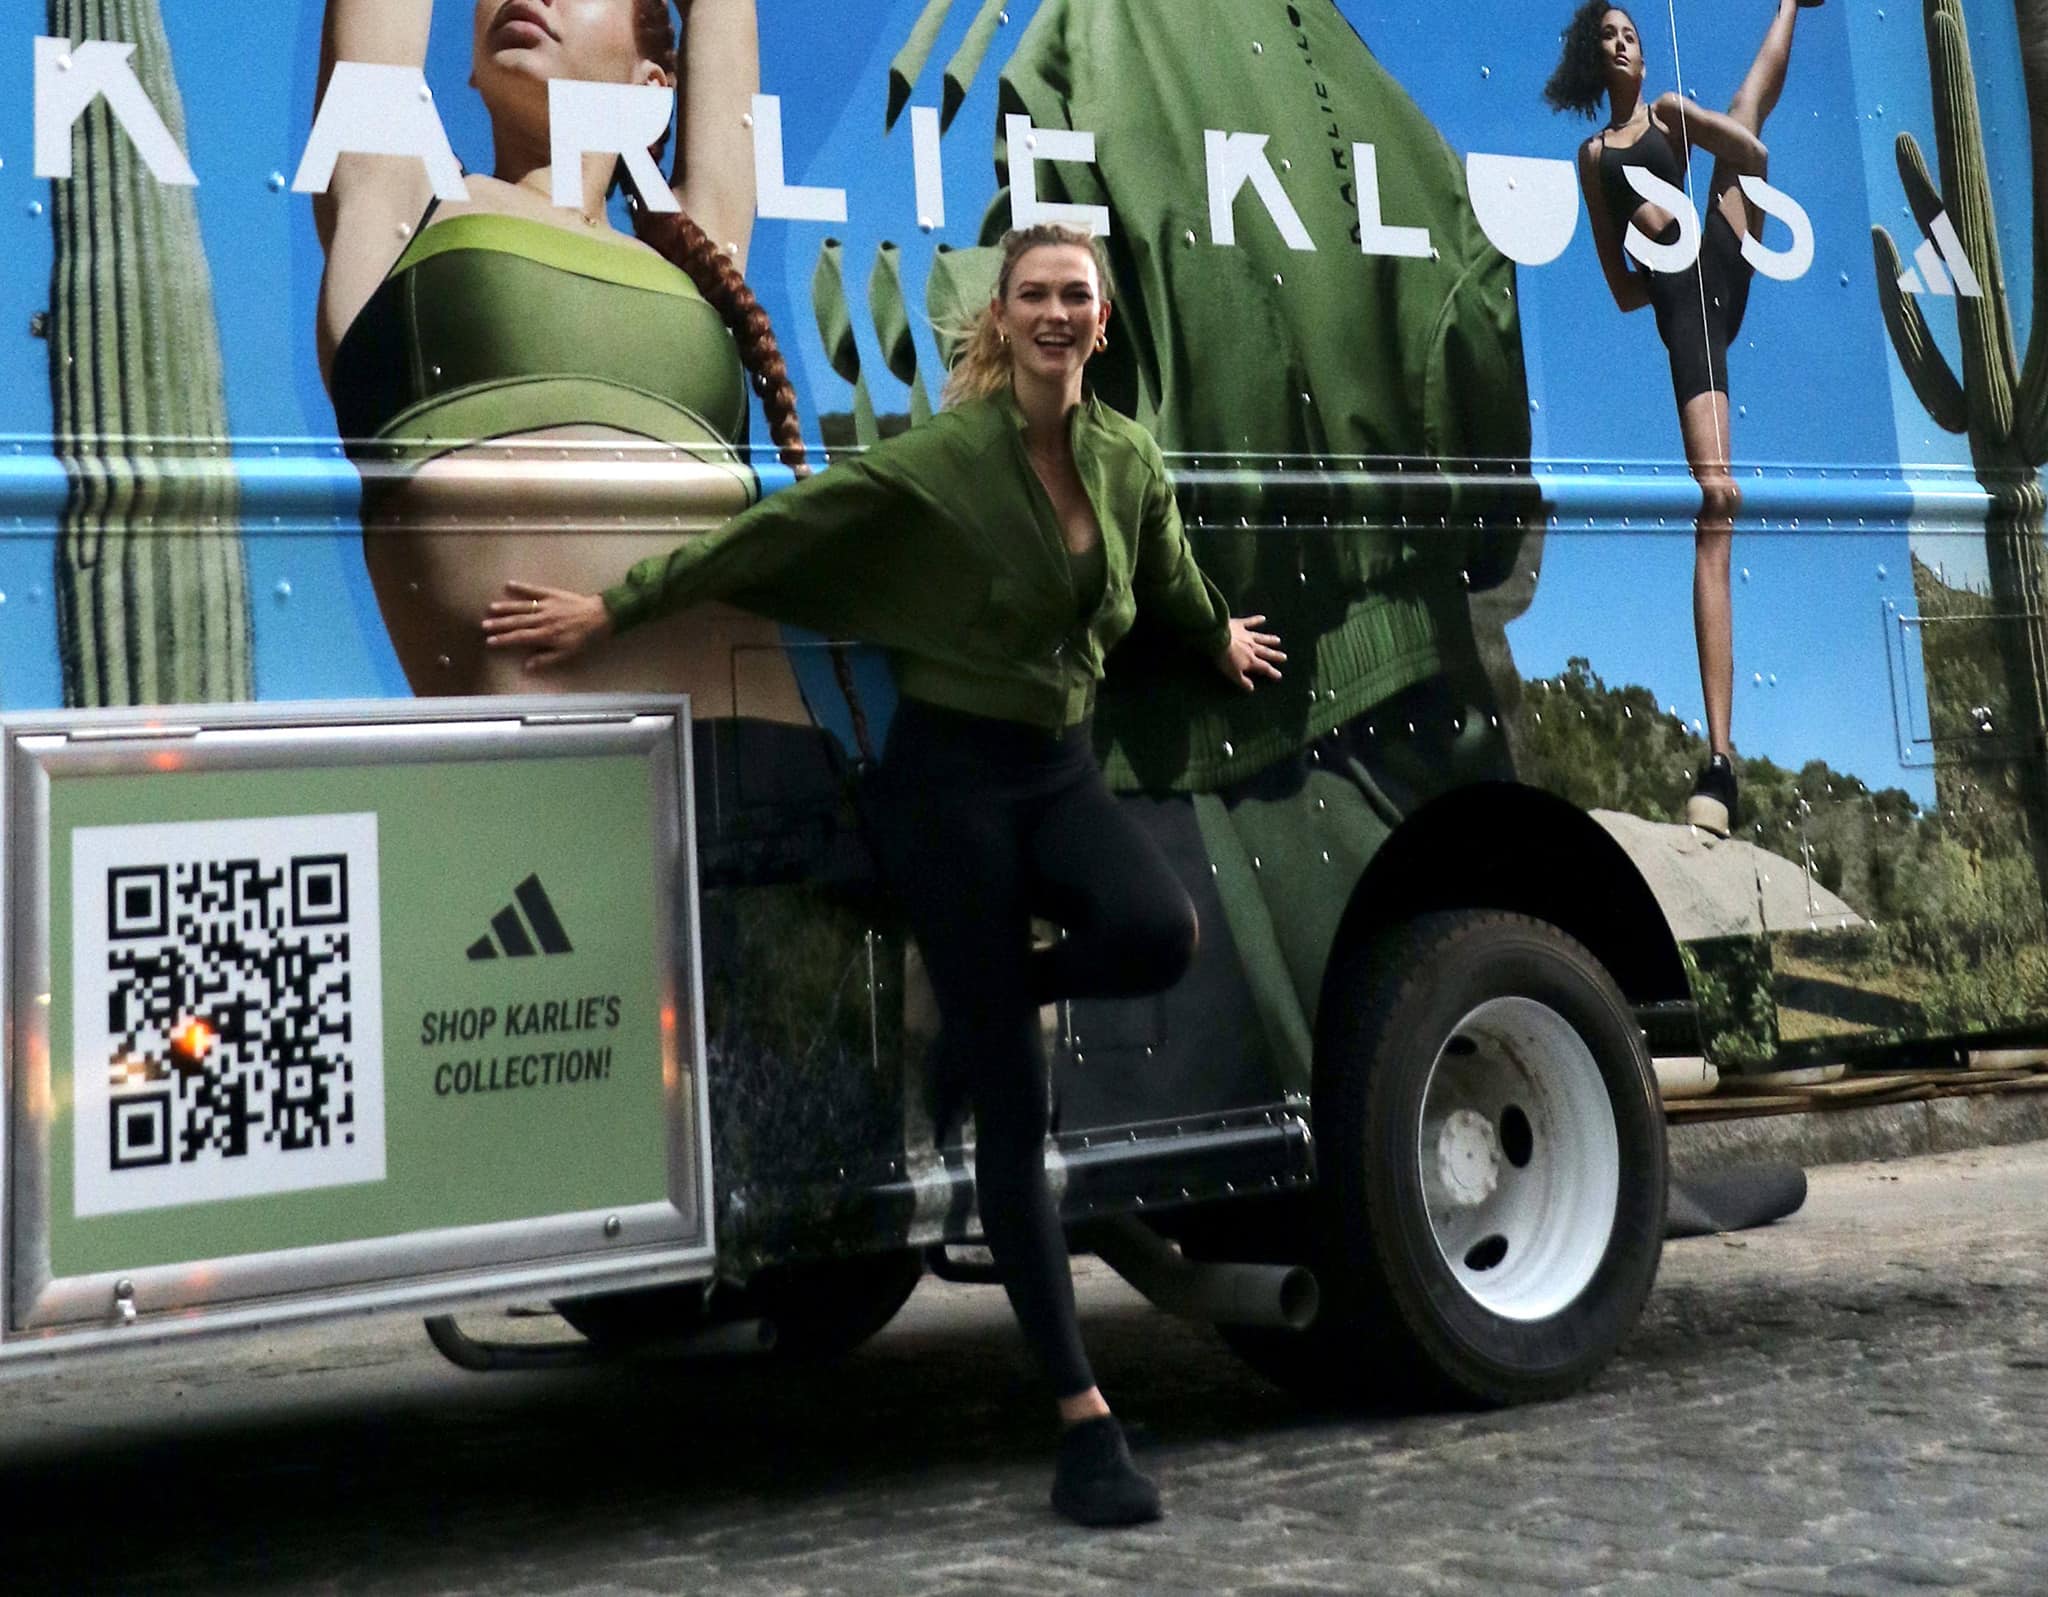 Karlie Kloss promotes her collection with Adidas around New York City on June 8, 2021